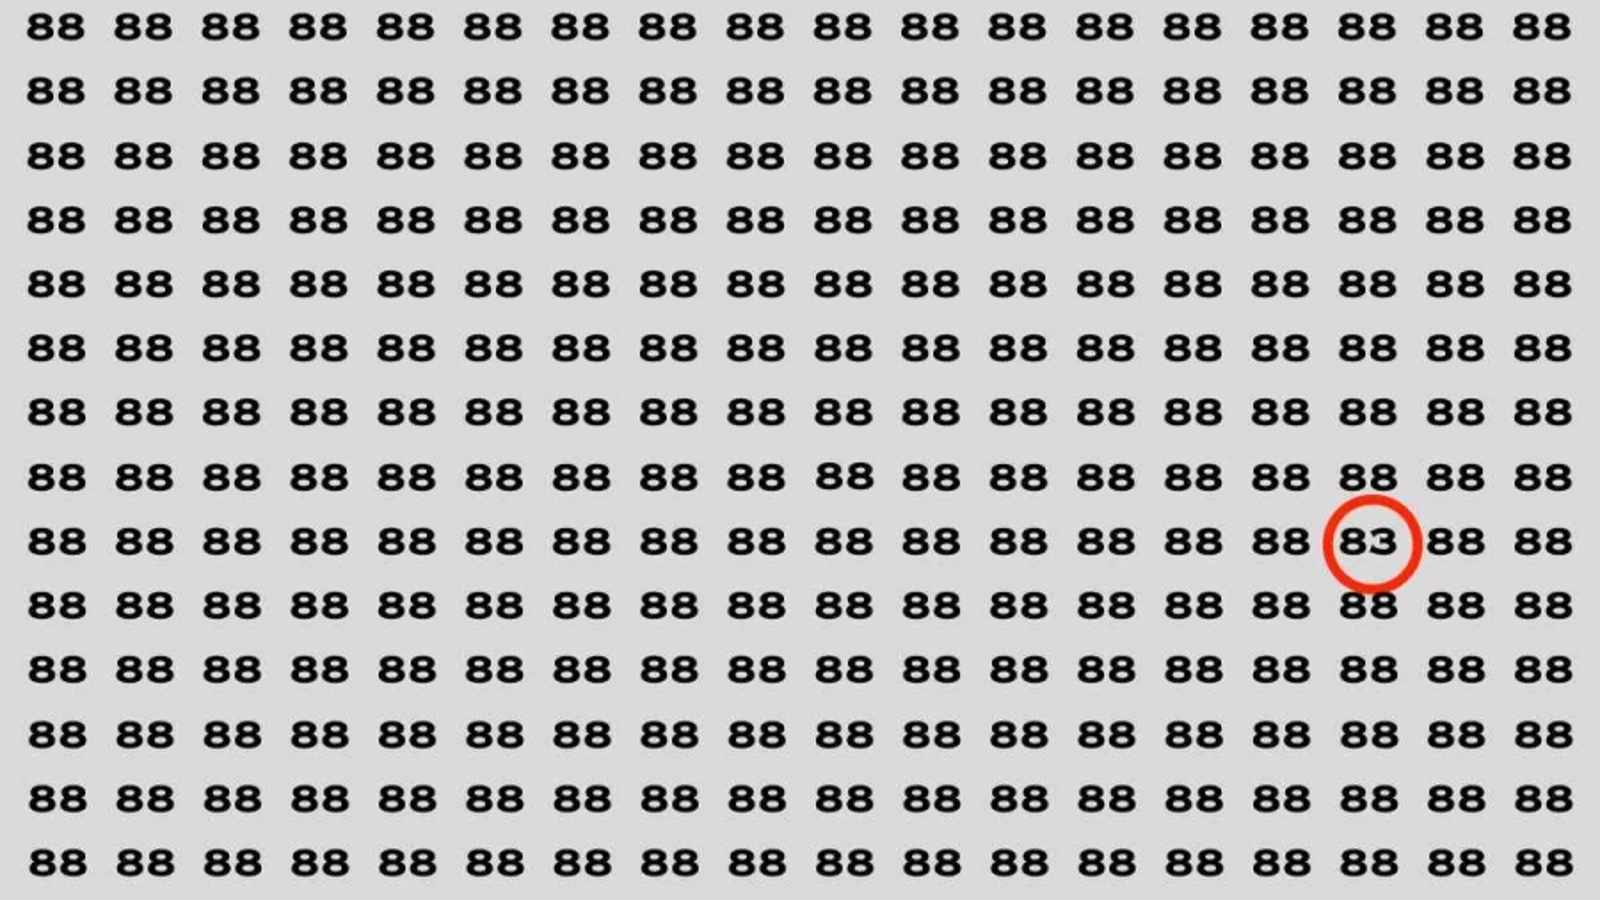 Brain Test Challenge: Spot the Number 83 Among 88 in 15 Seconds!